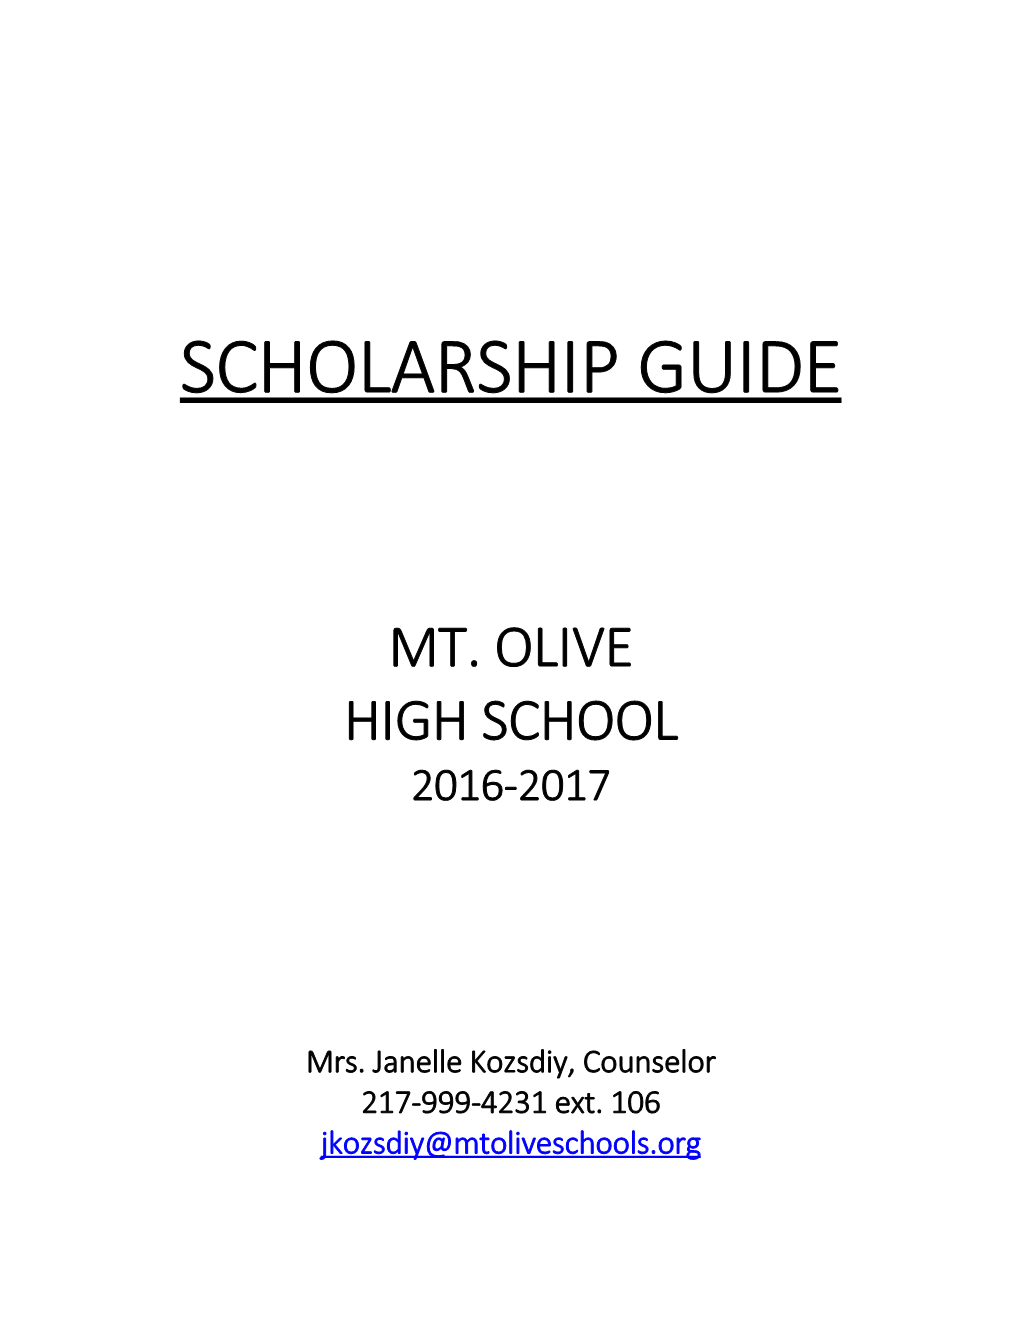 Scholarship Guide